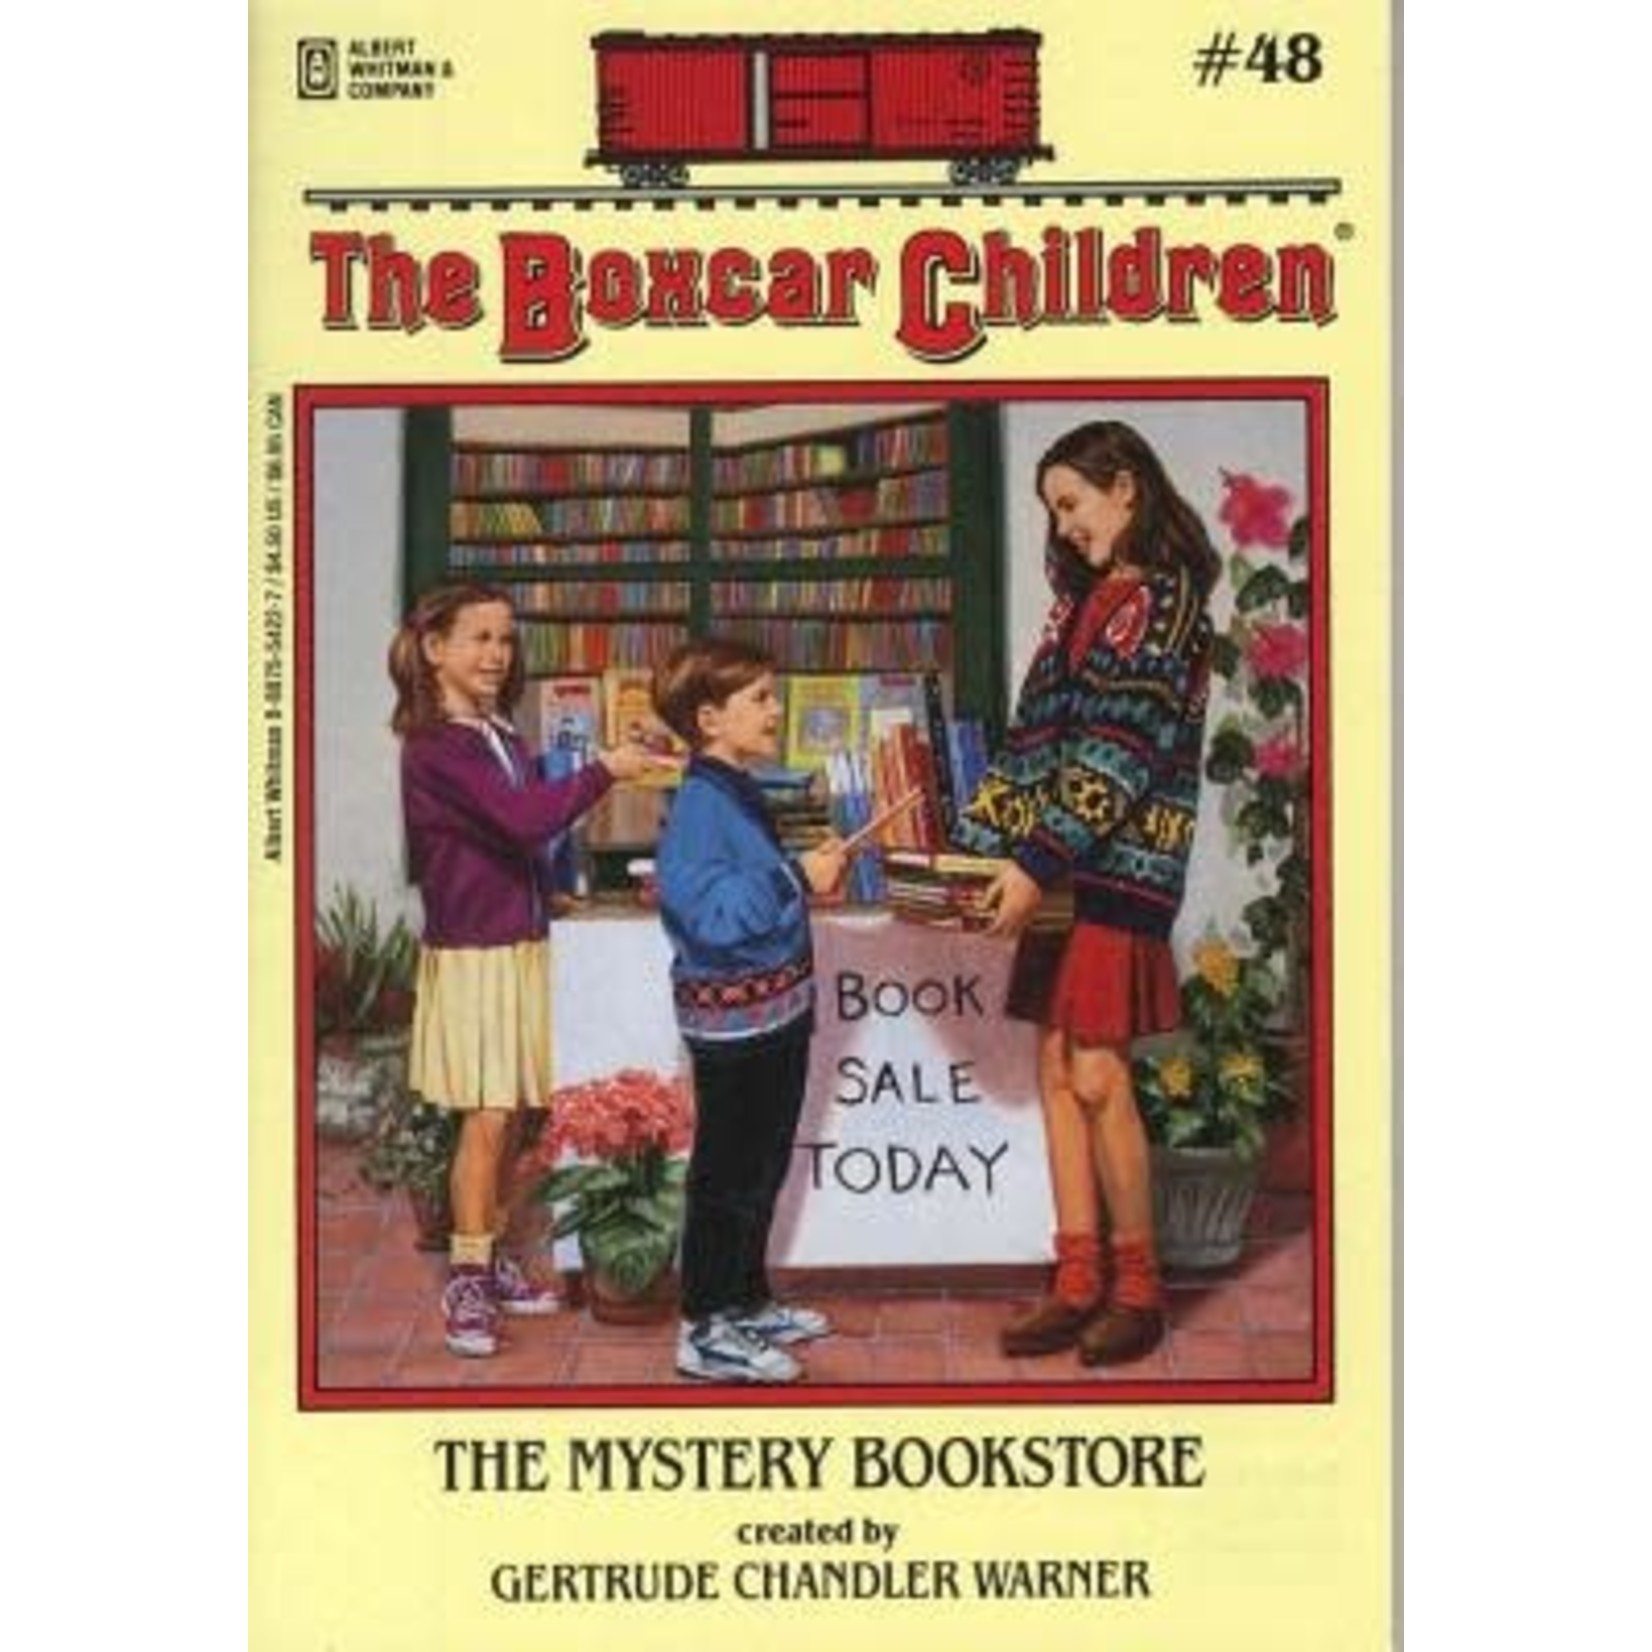 Gertrude Chandler Warner The Boxcar Children #48 The Mystery Bookstore